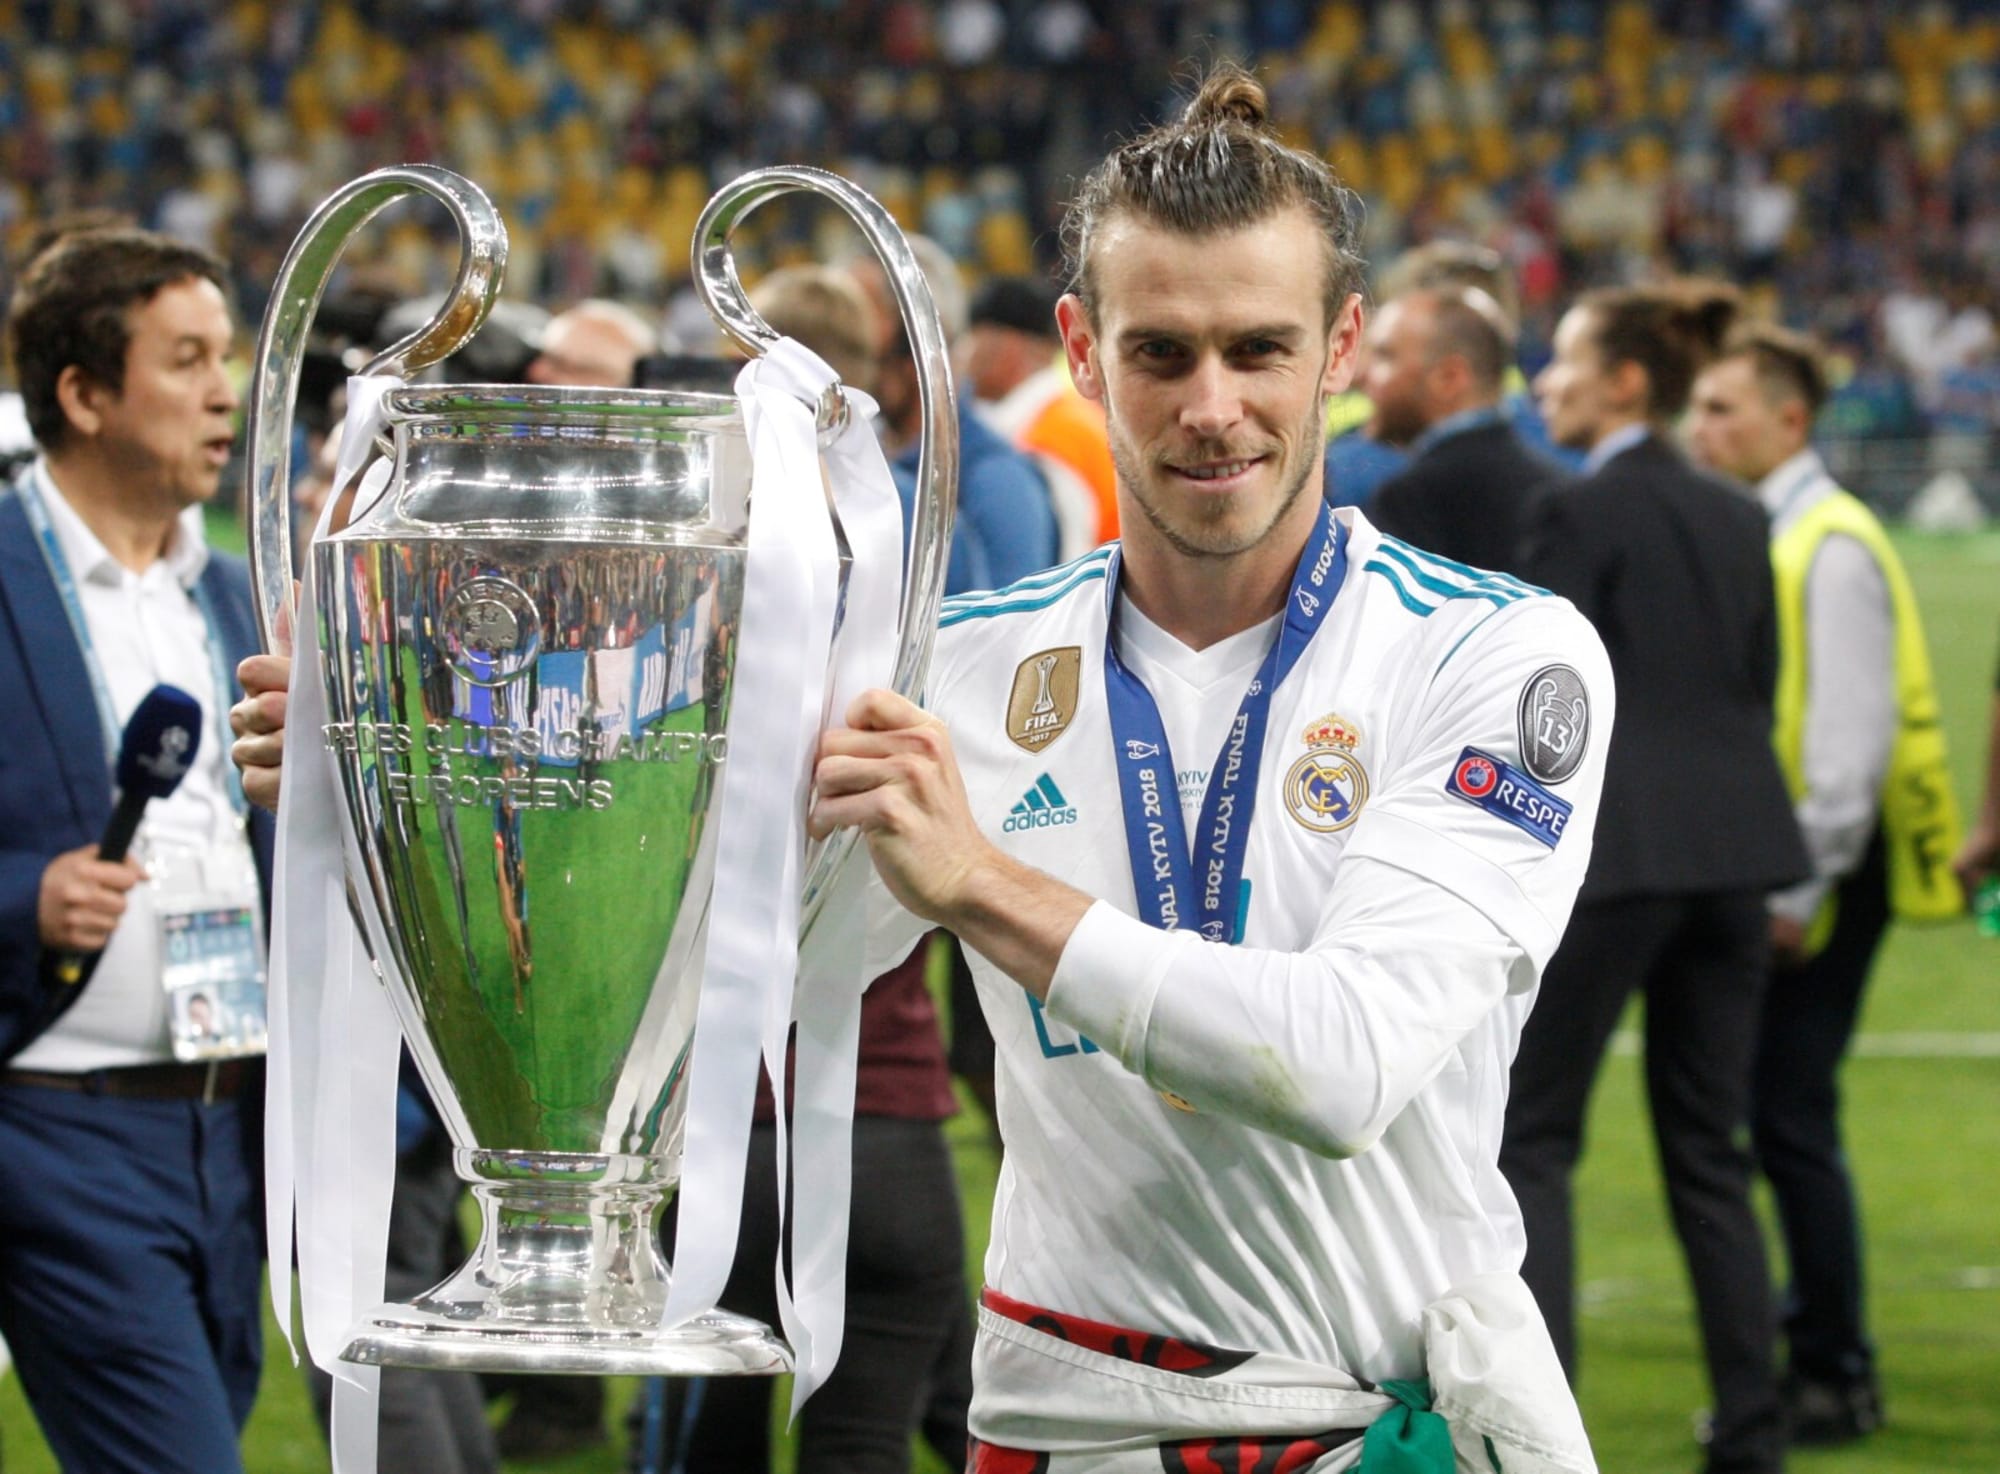 How many trophies did Gareth Bale win? Former Real Madrid